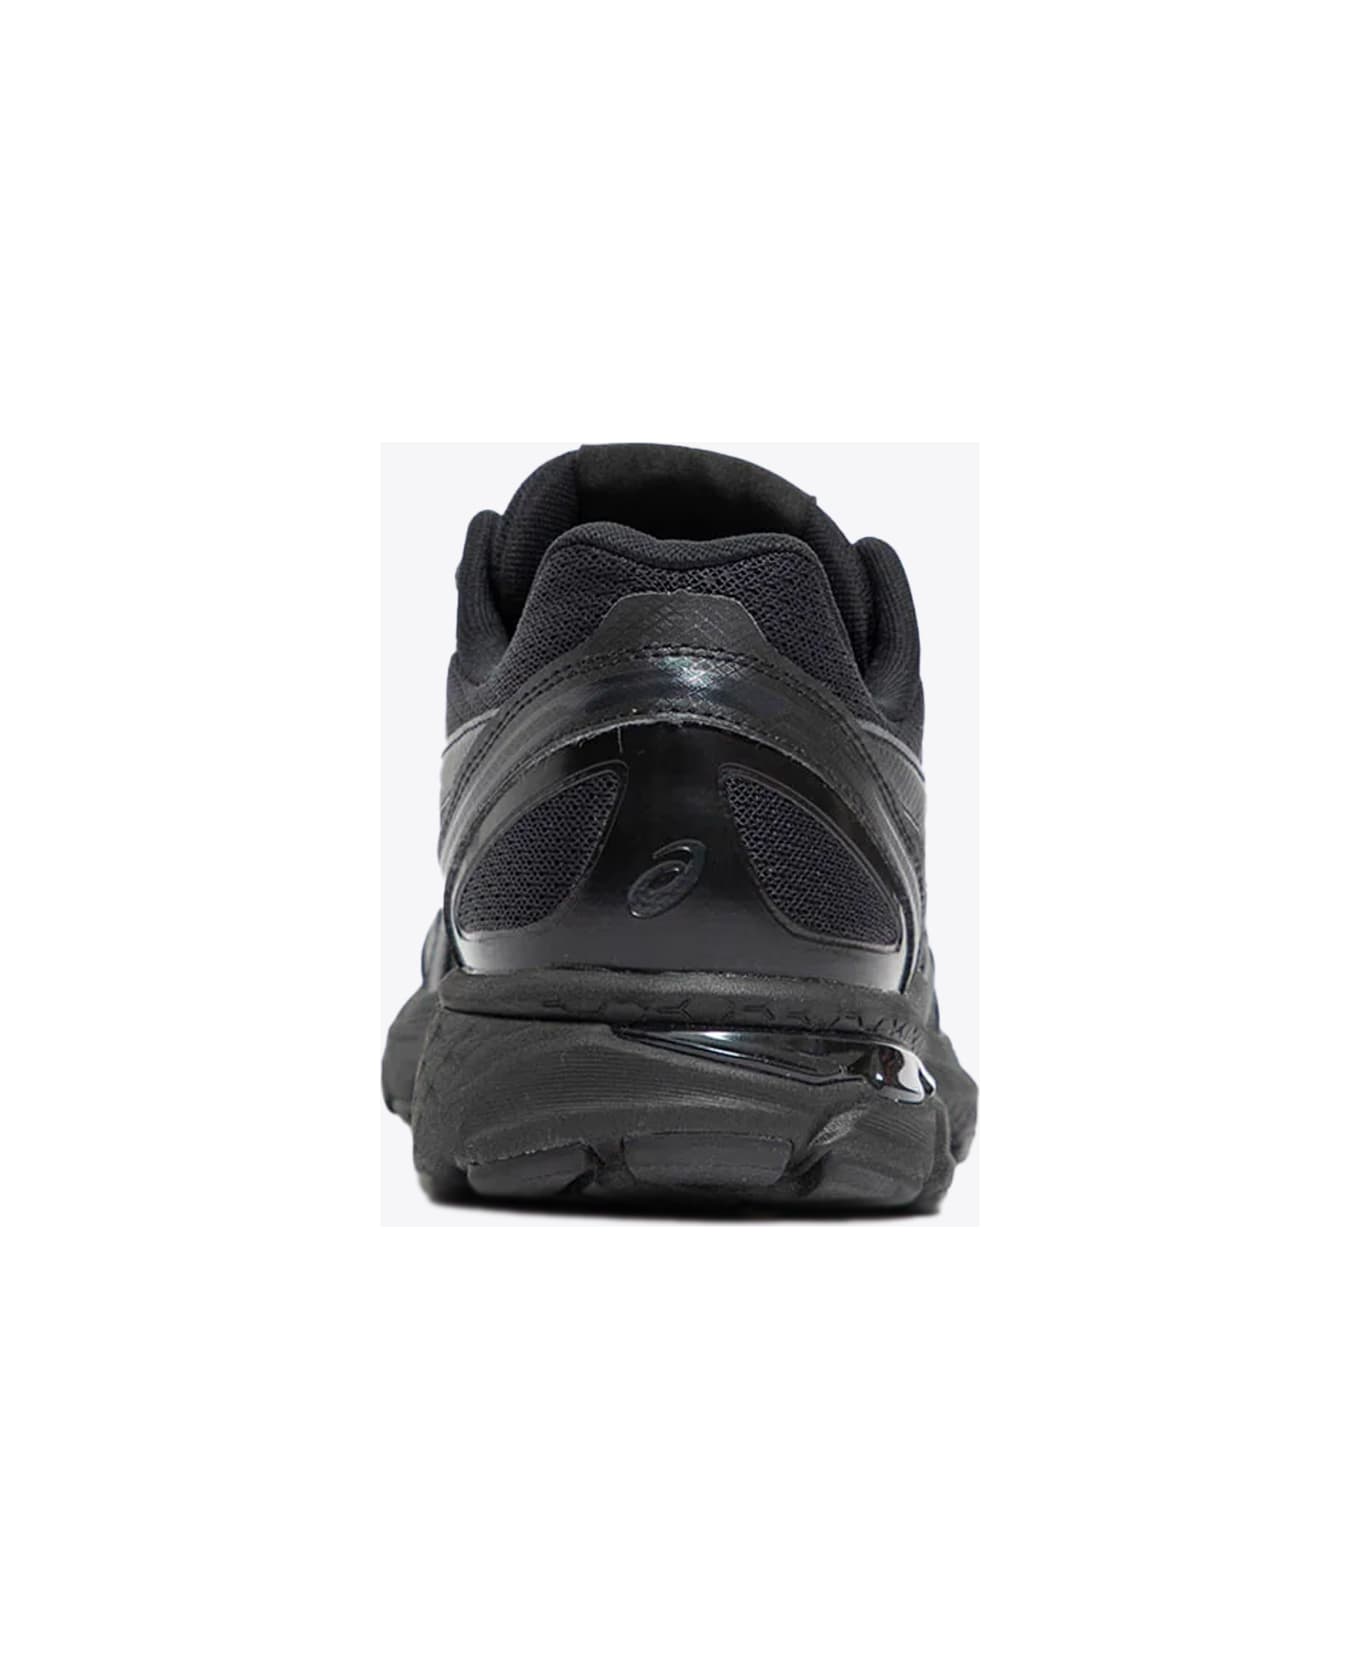 Comme des Garçons Shirt Mens Sneakers X Asics Asics collaboration black mesh and leather running sneaker - Nero